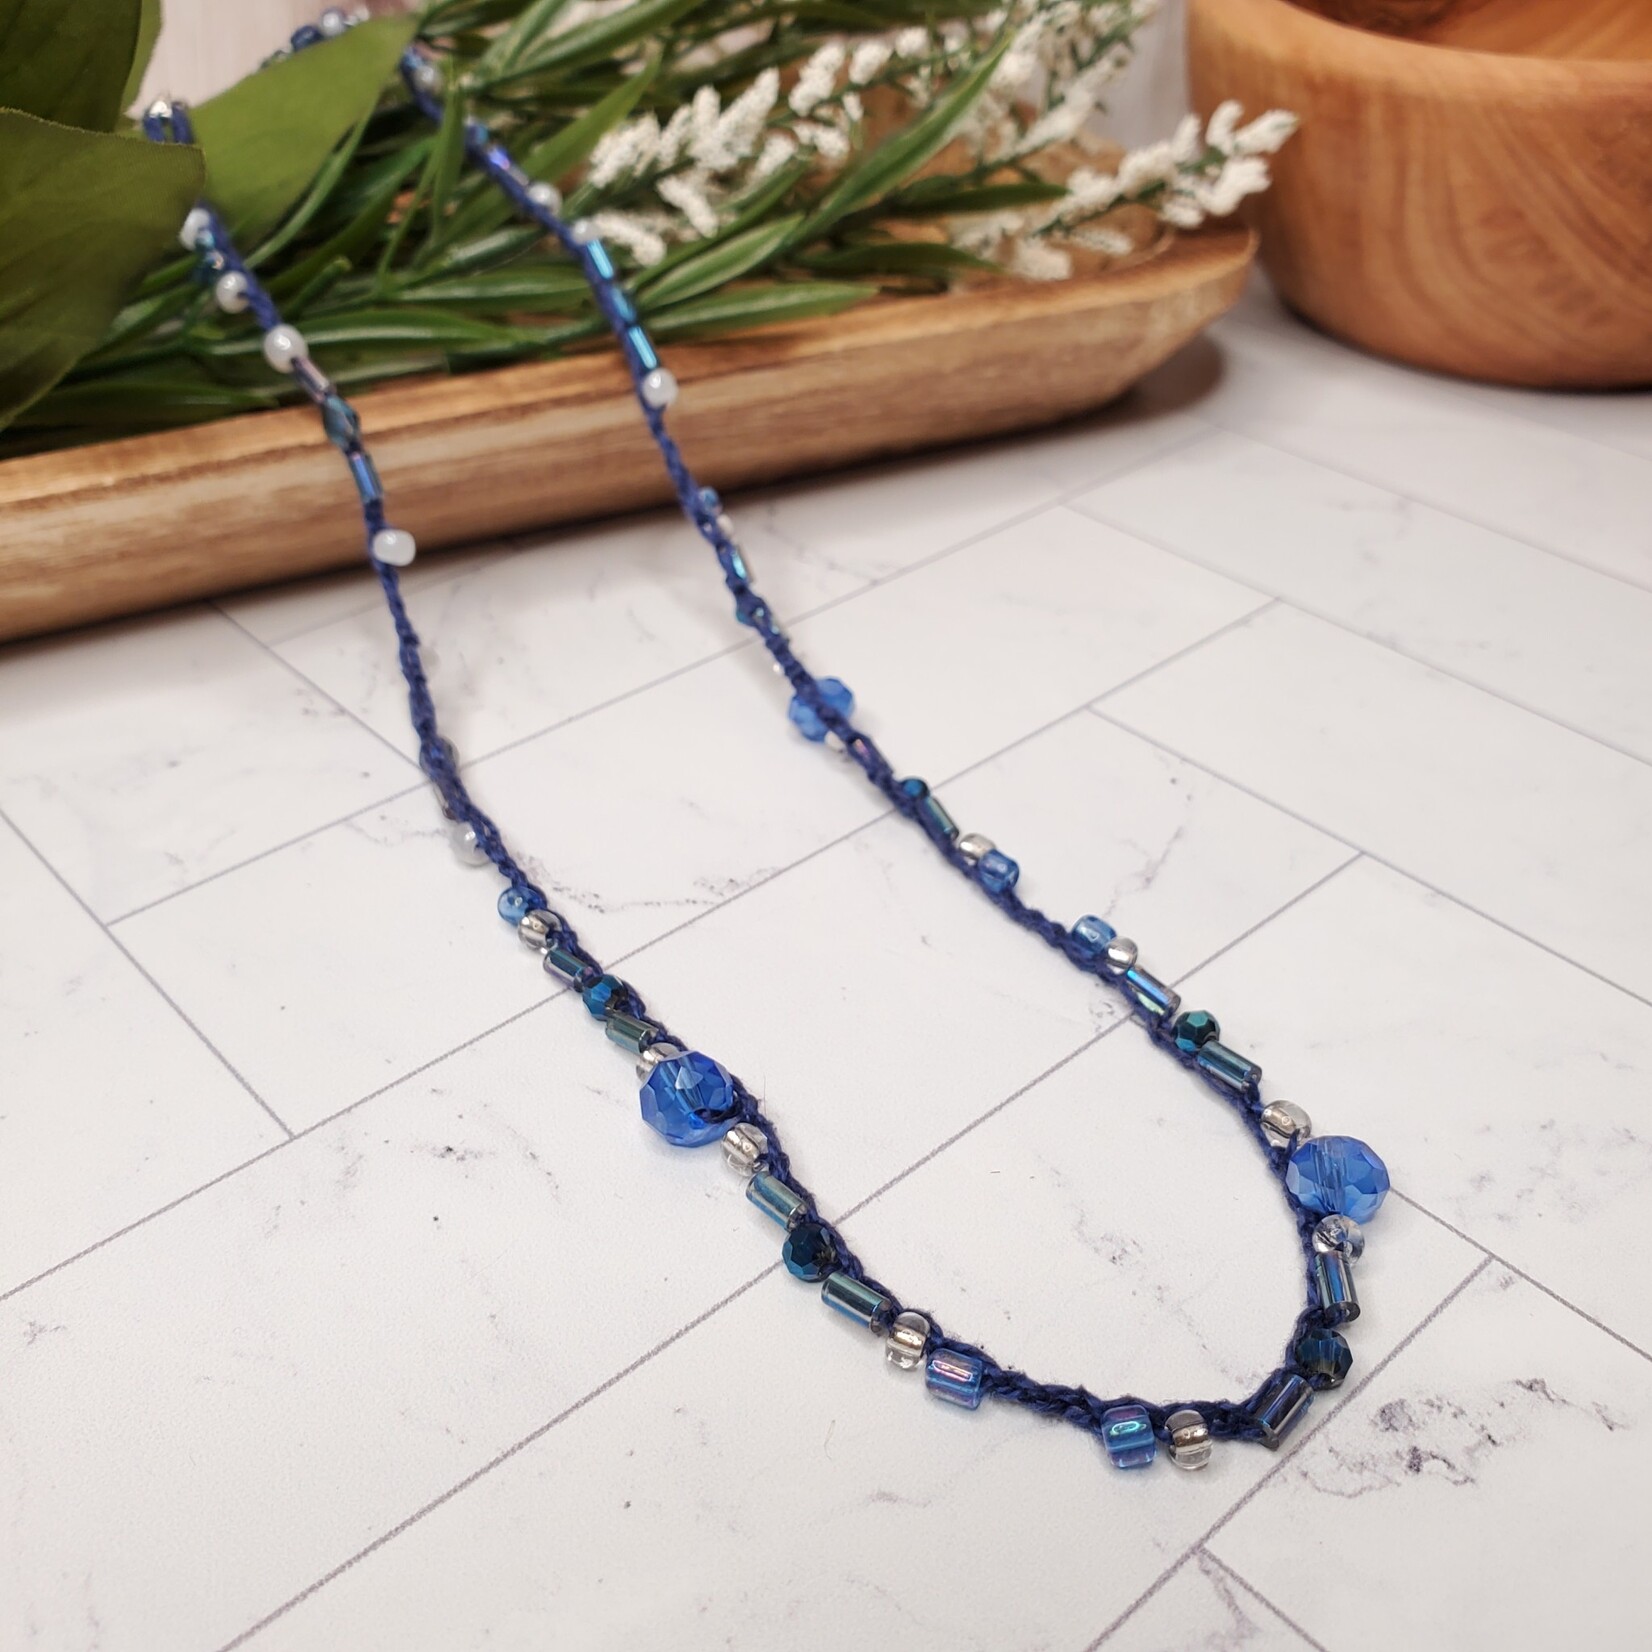 Crescent Moon Jewelry of the Sierras Bead Crochet Necklace - Blue & Pearl - 22"